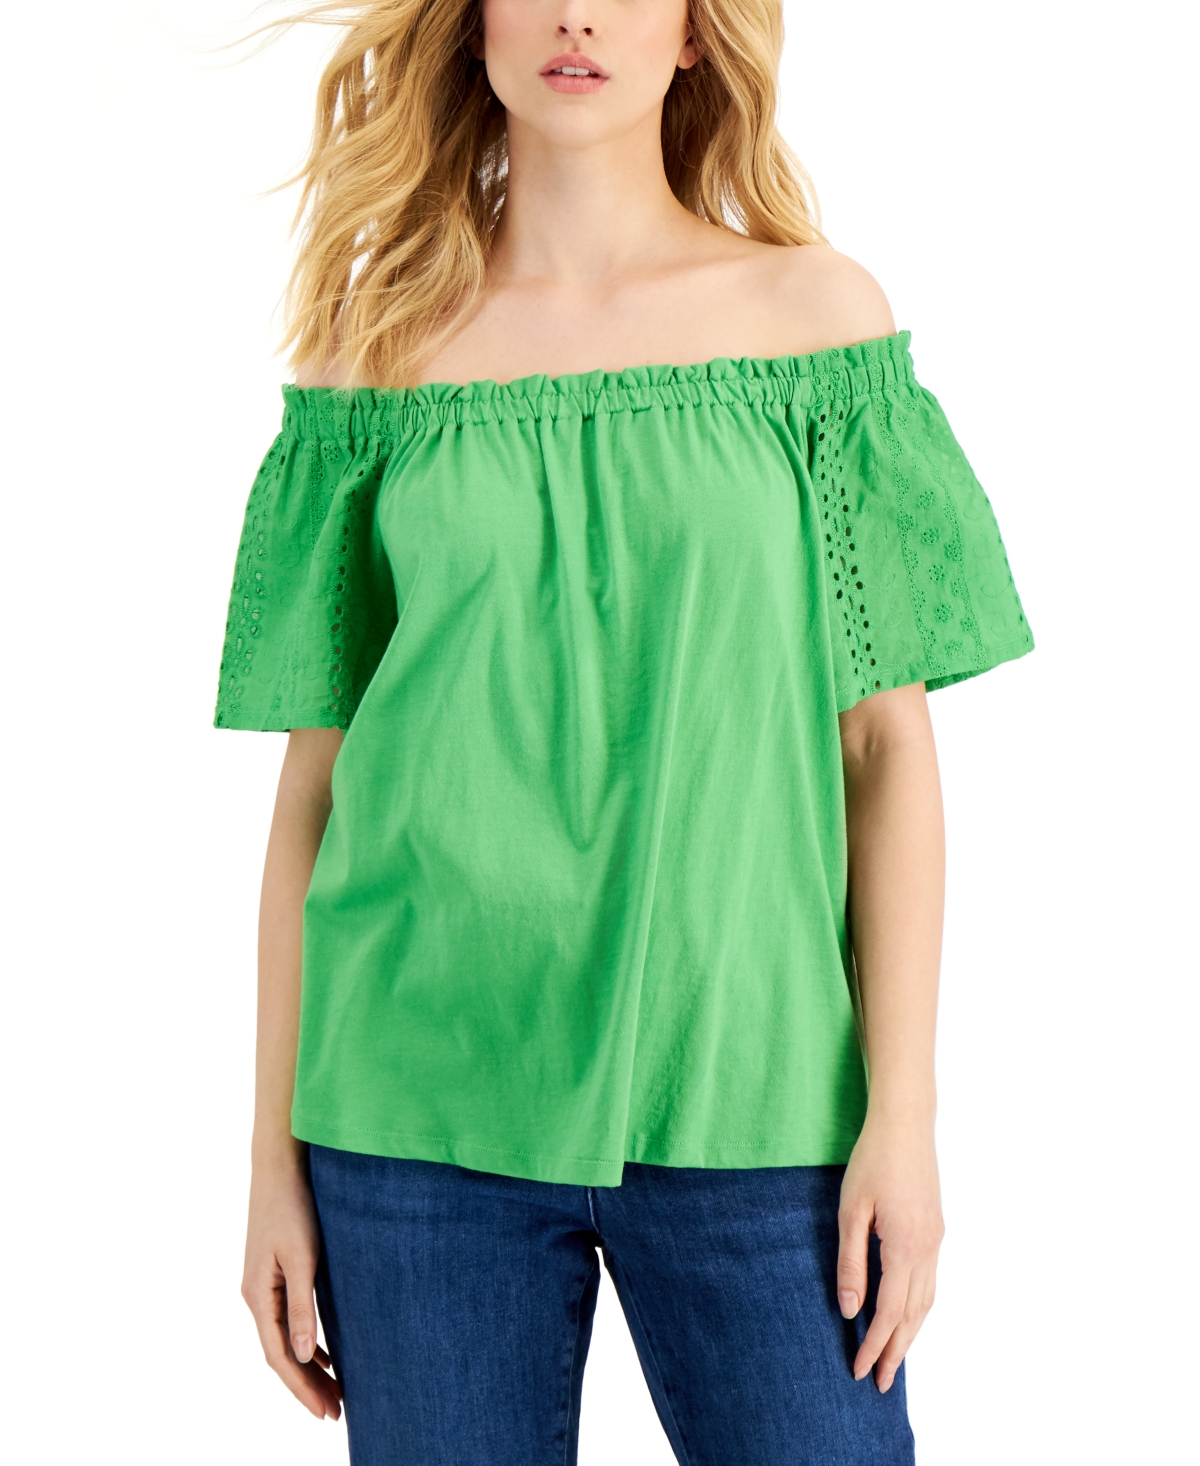 Charter Club Women's Eyelet Off-The-Shoulder Top, Created for Macy's